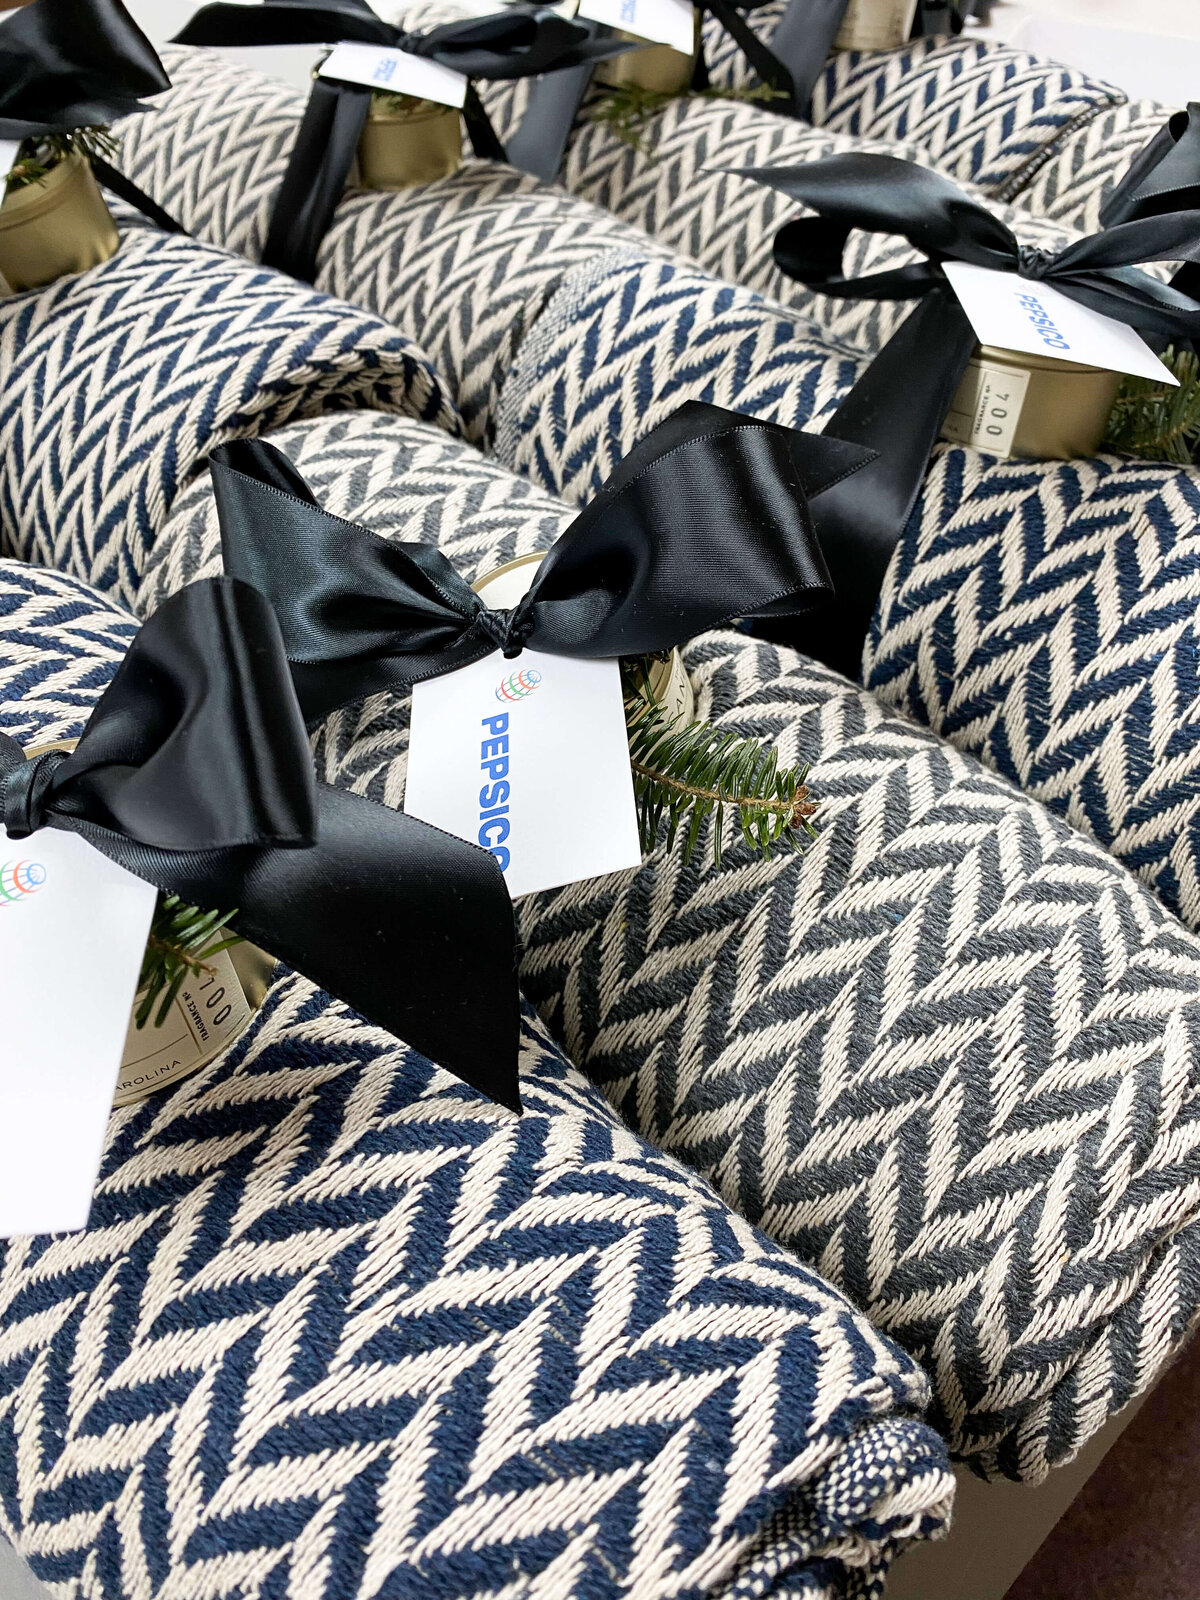 Corporate Gift Boxes with Blankets